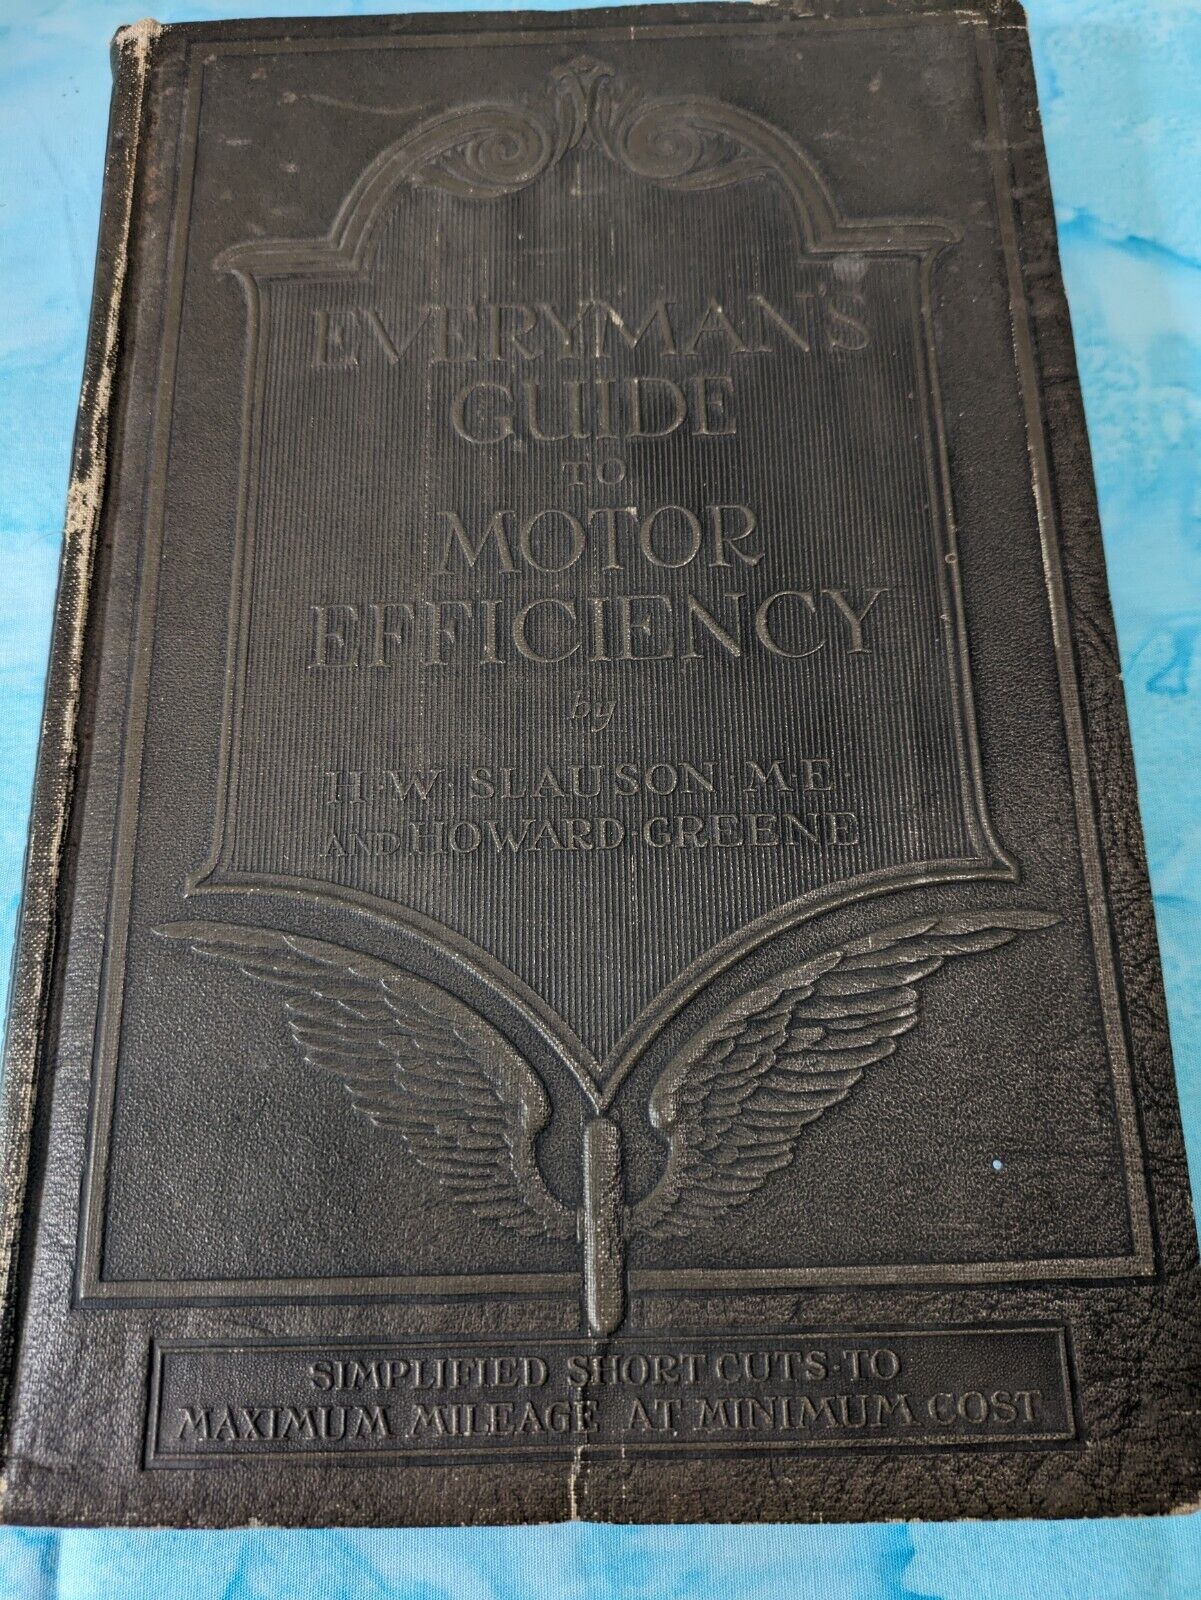 Antique 1922 Everyman's Guide to Motor Efficiency Manual for Antique Cars